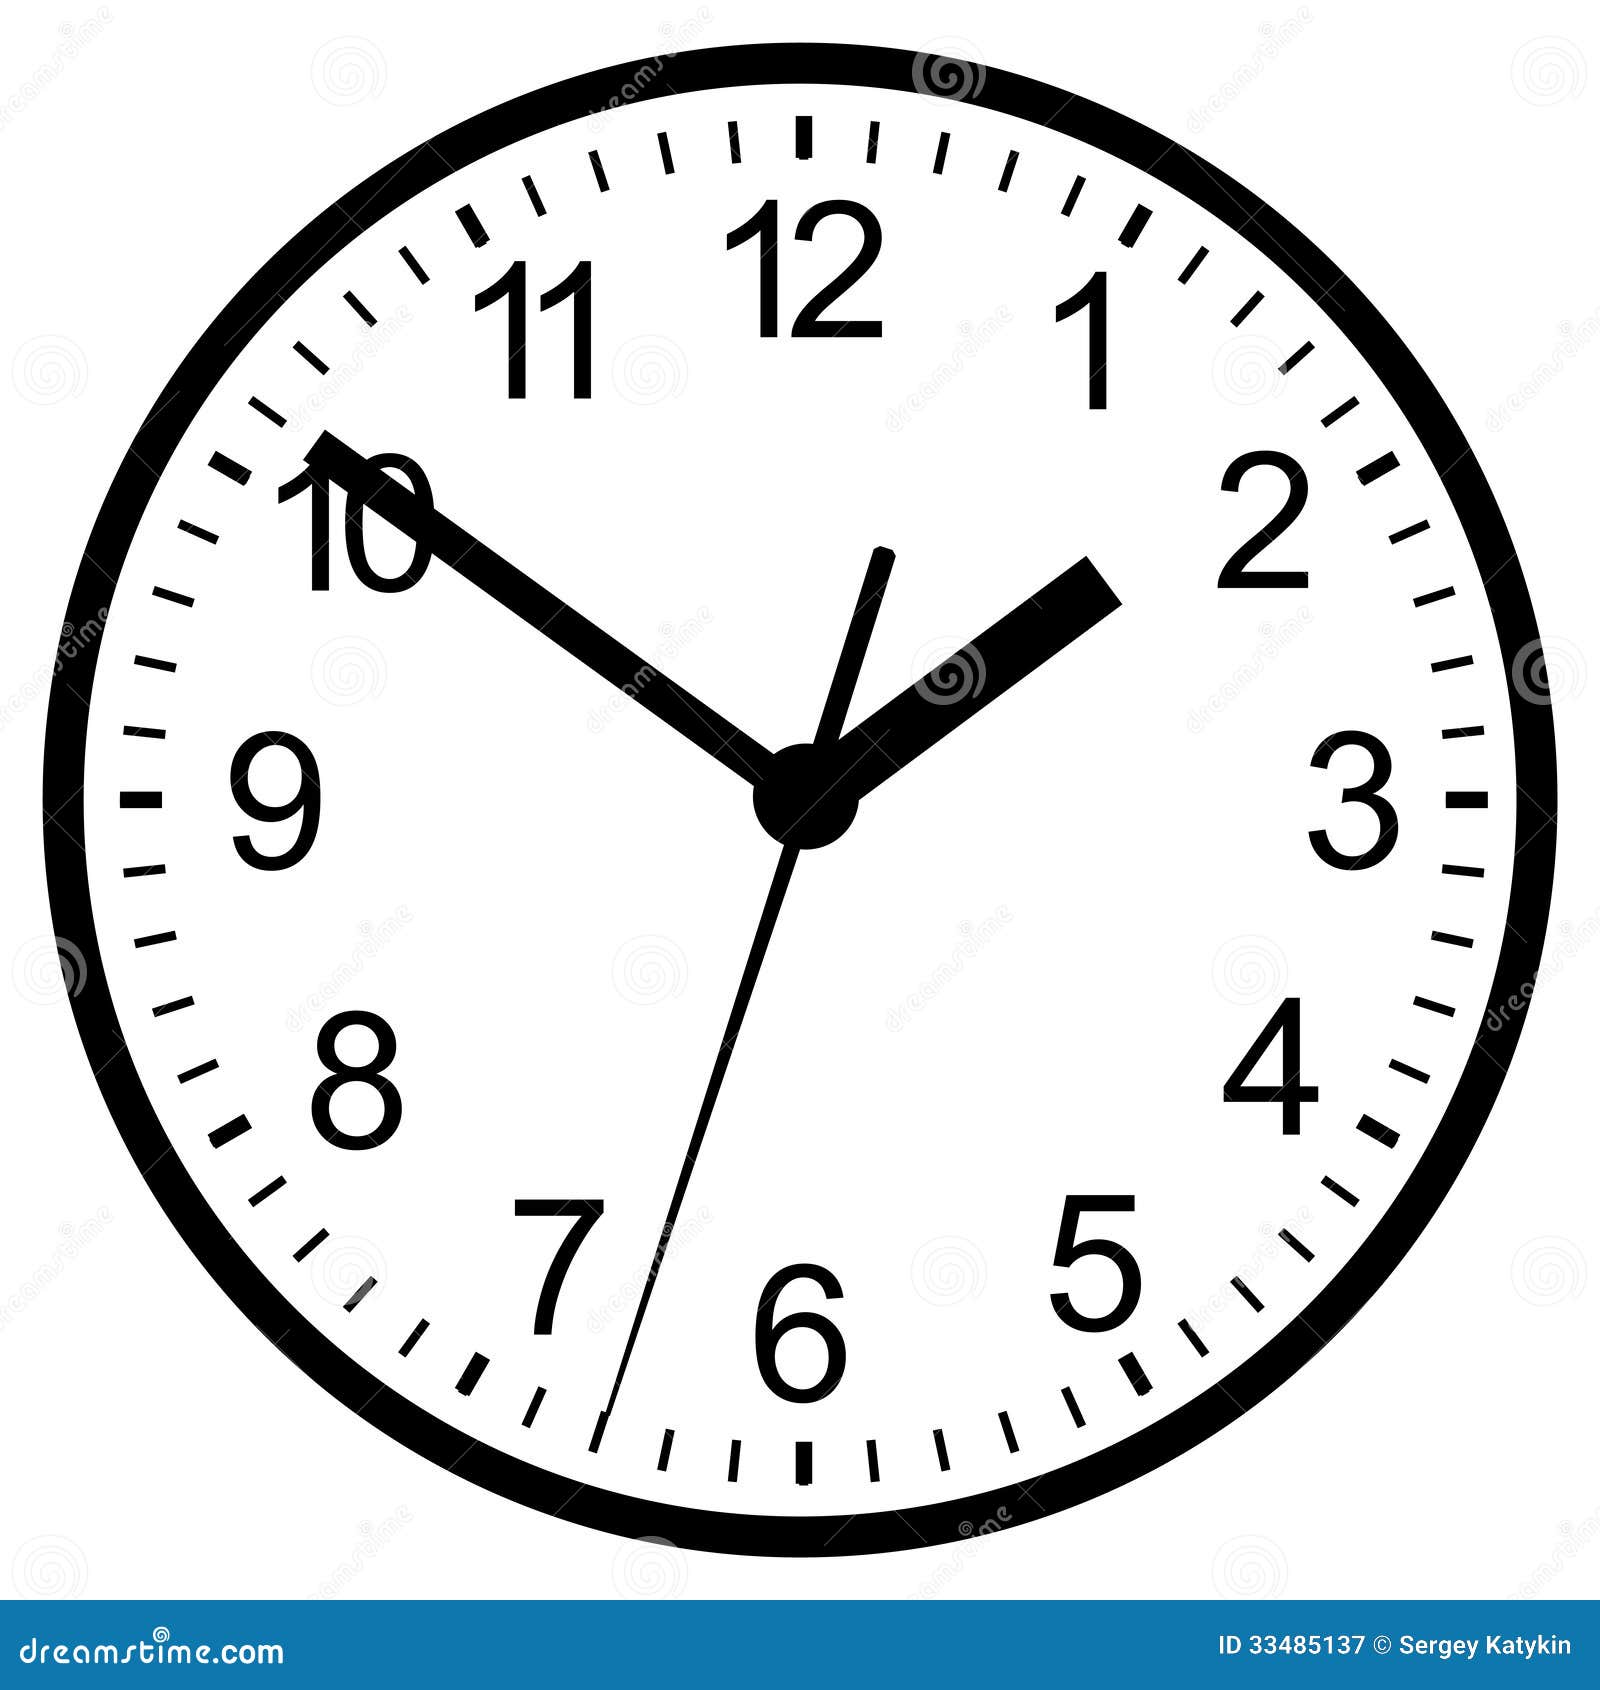 wall clock clipart black and white - photo #19